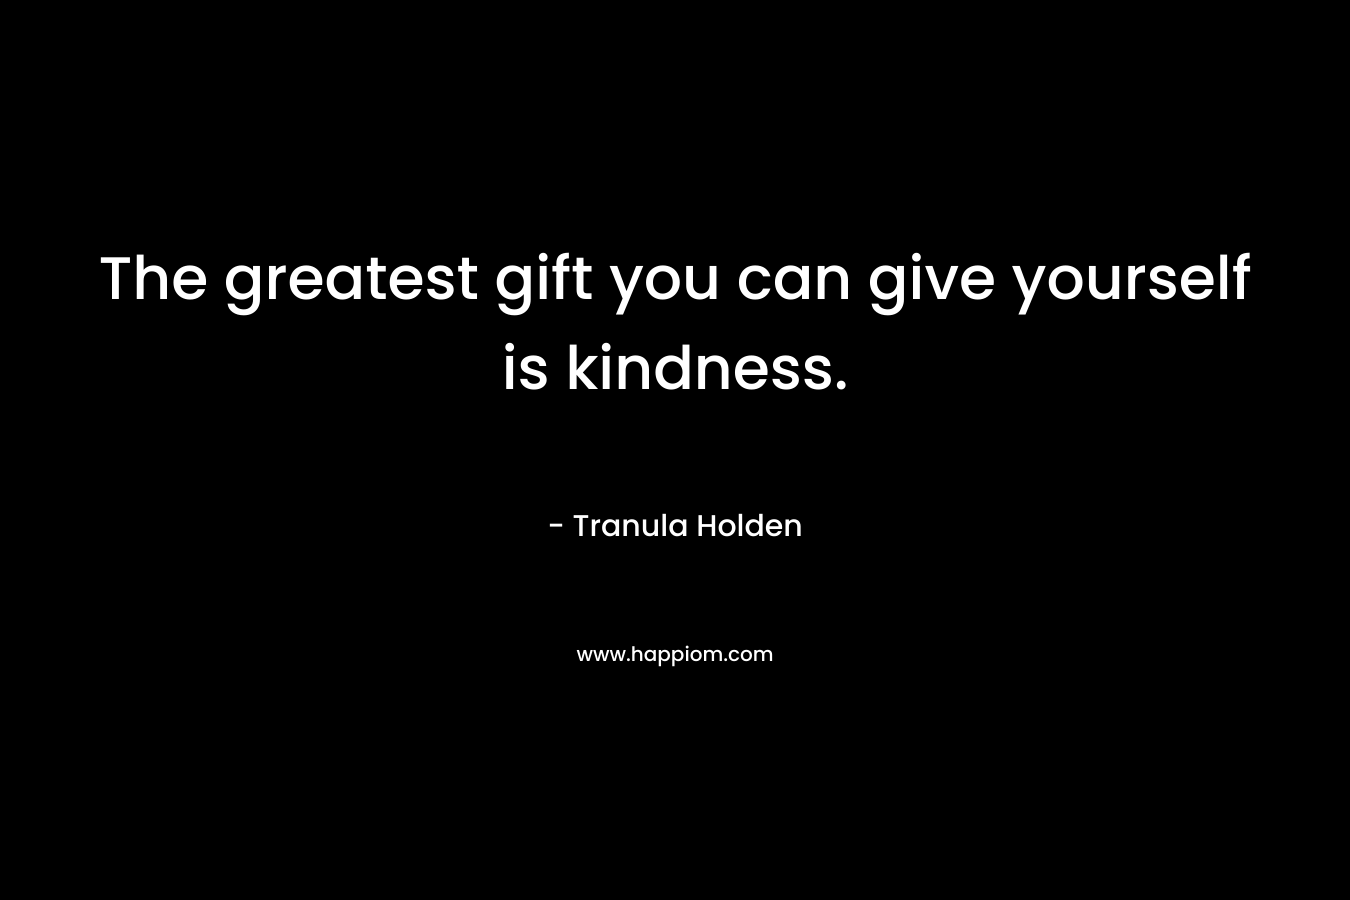 The greatest gift you can give yourself is kindness. – Tranula Holden